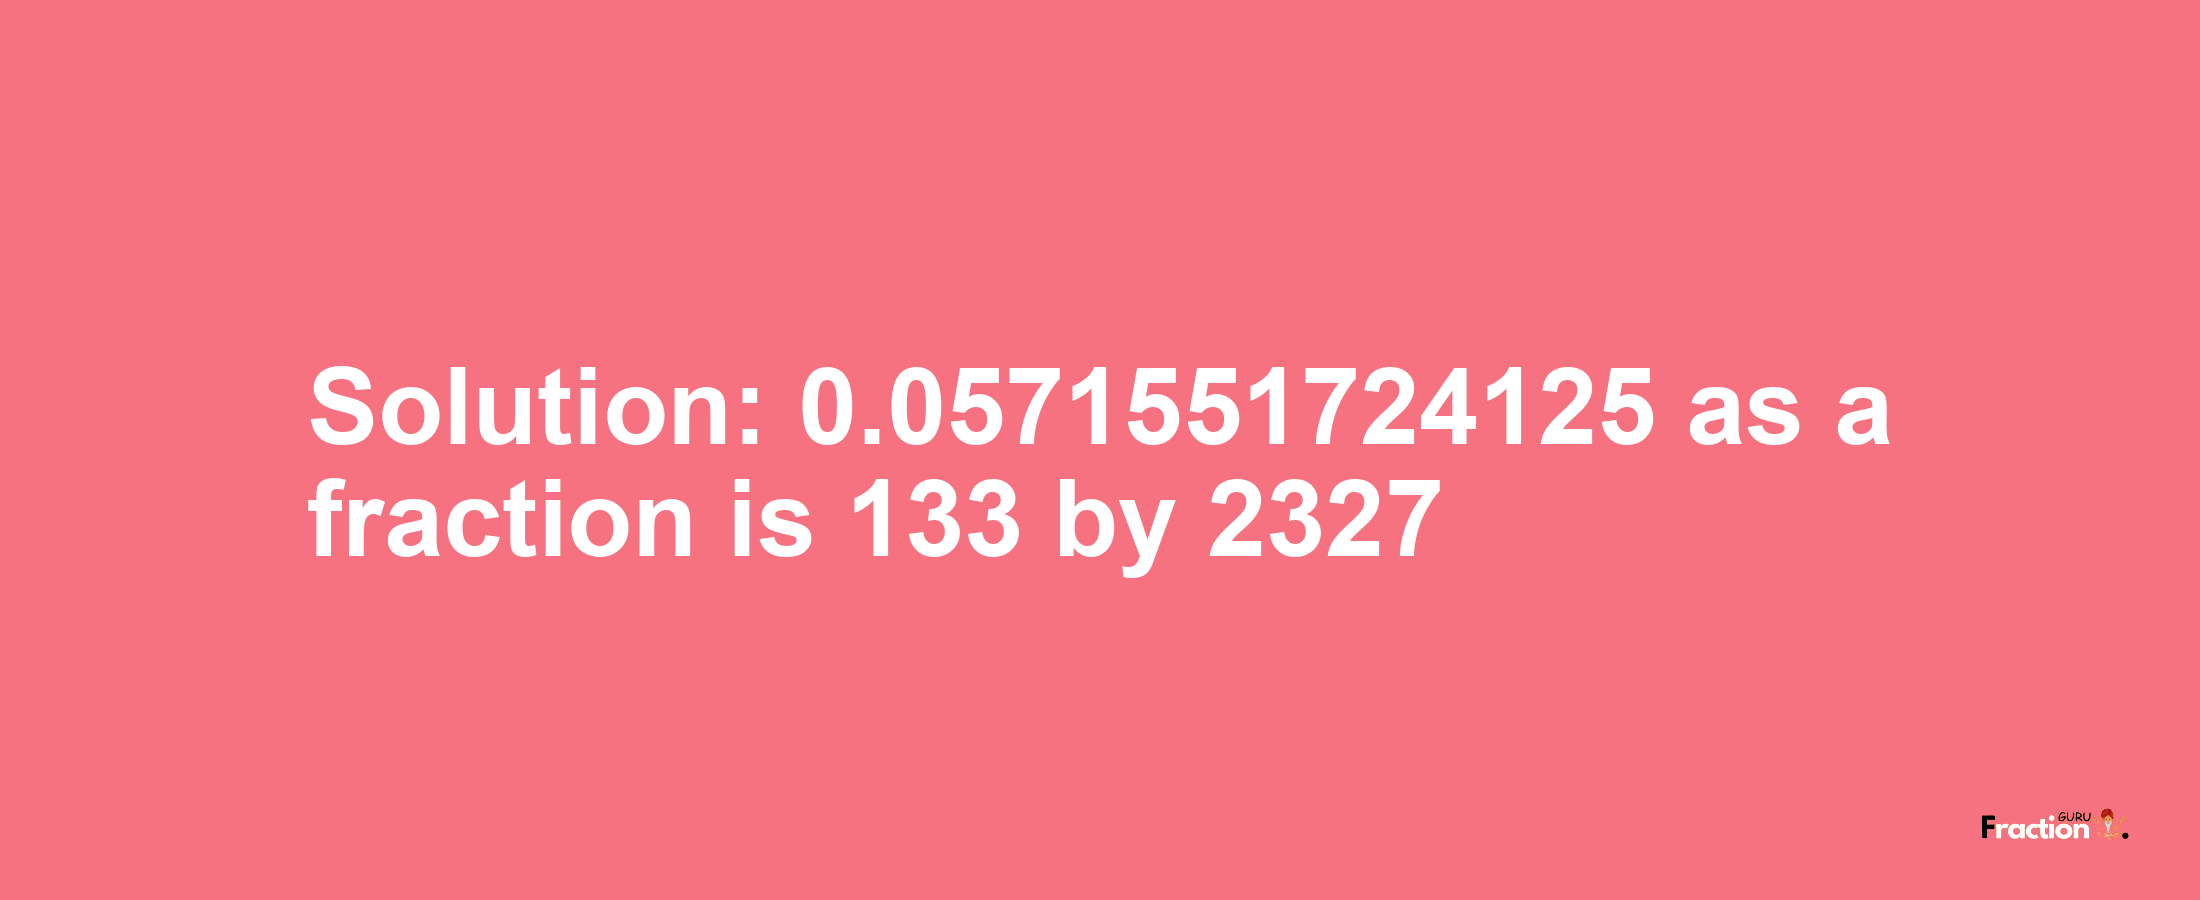 Solution:0.0571551724125 as a fraction is 133/2327